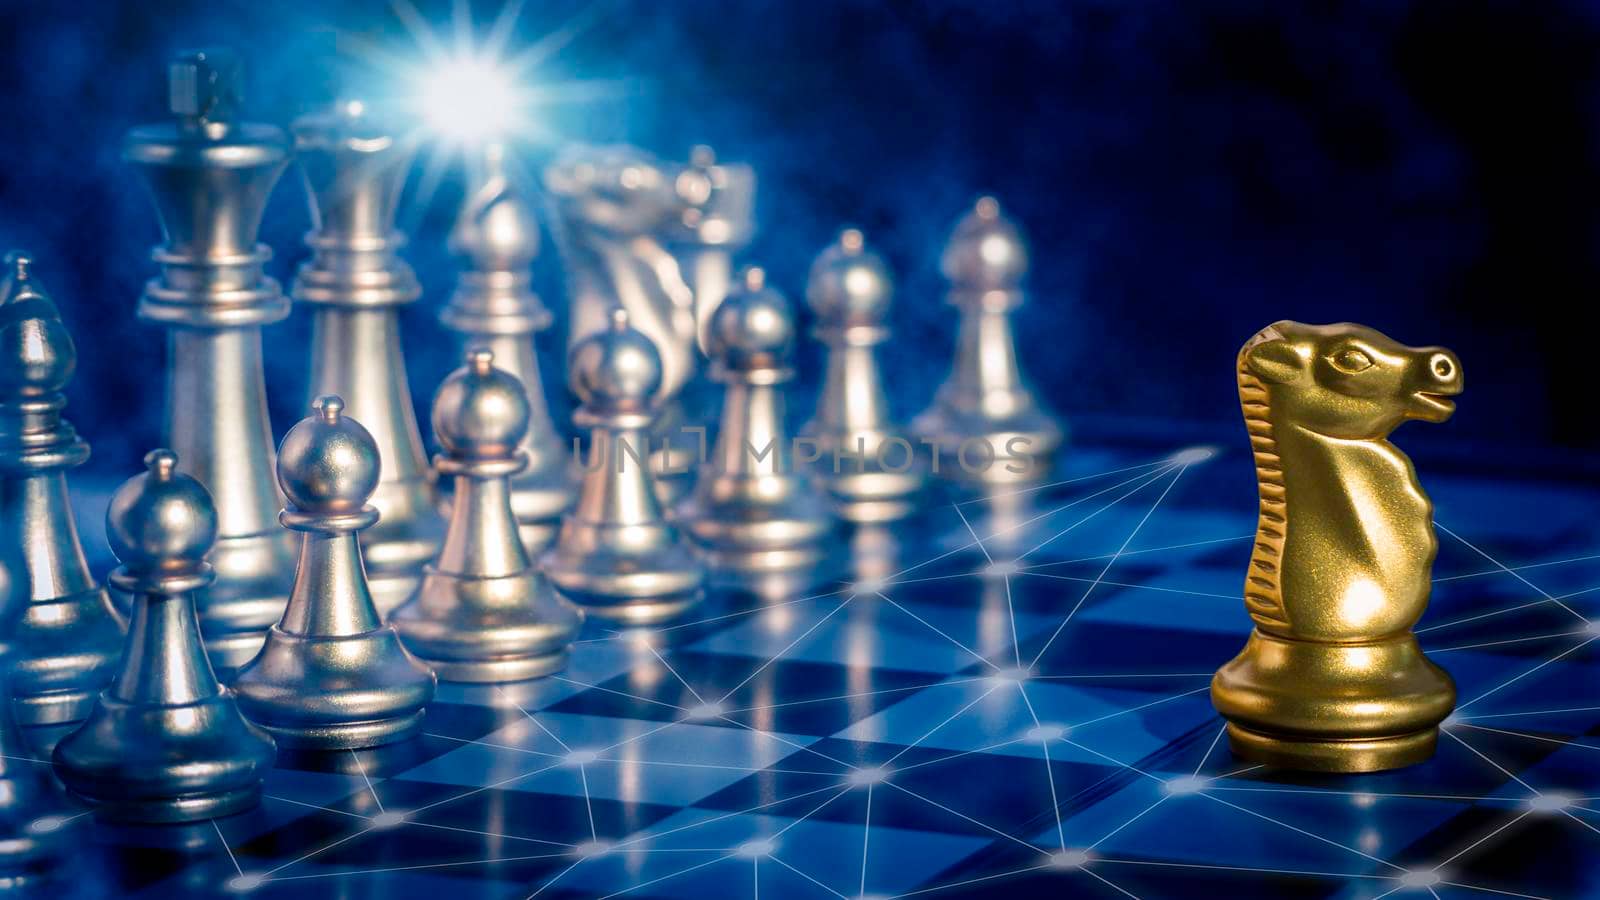 Golden knight chess is leadership in front off silver chess pieces on chess board with network and communication 
flare light to fighting with teamwork to victory, business strategy concept for success.